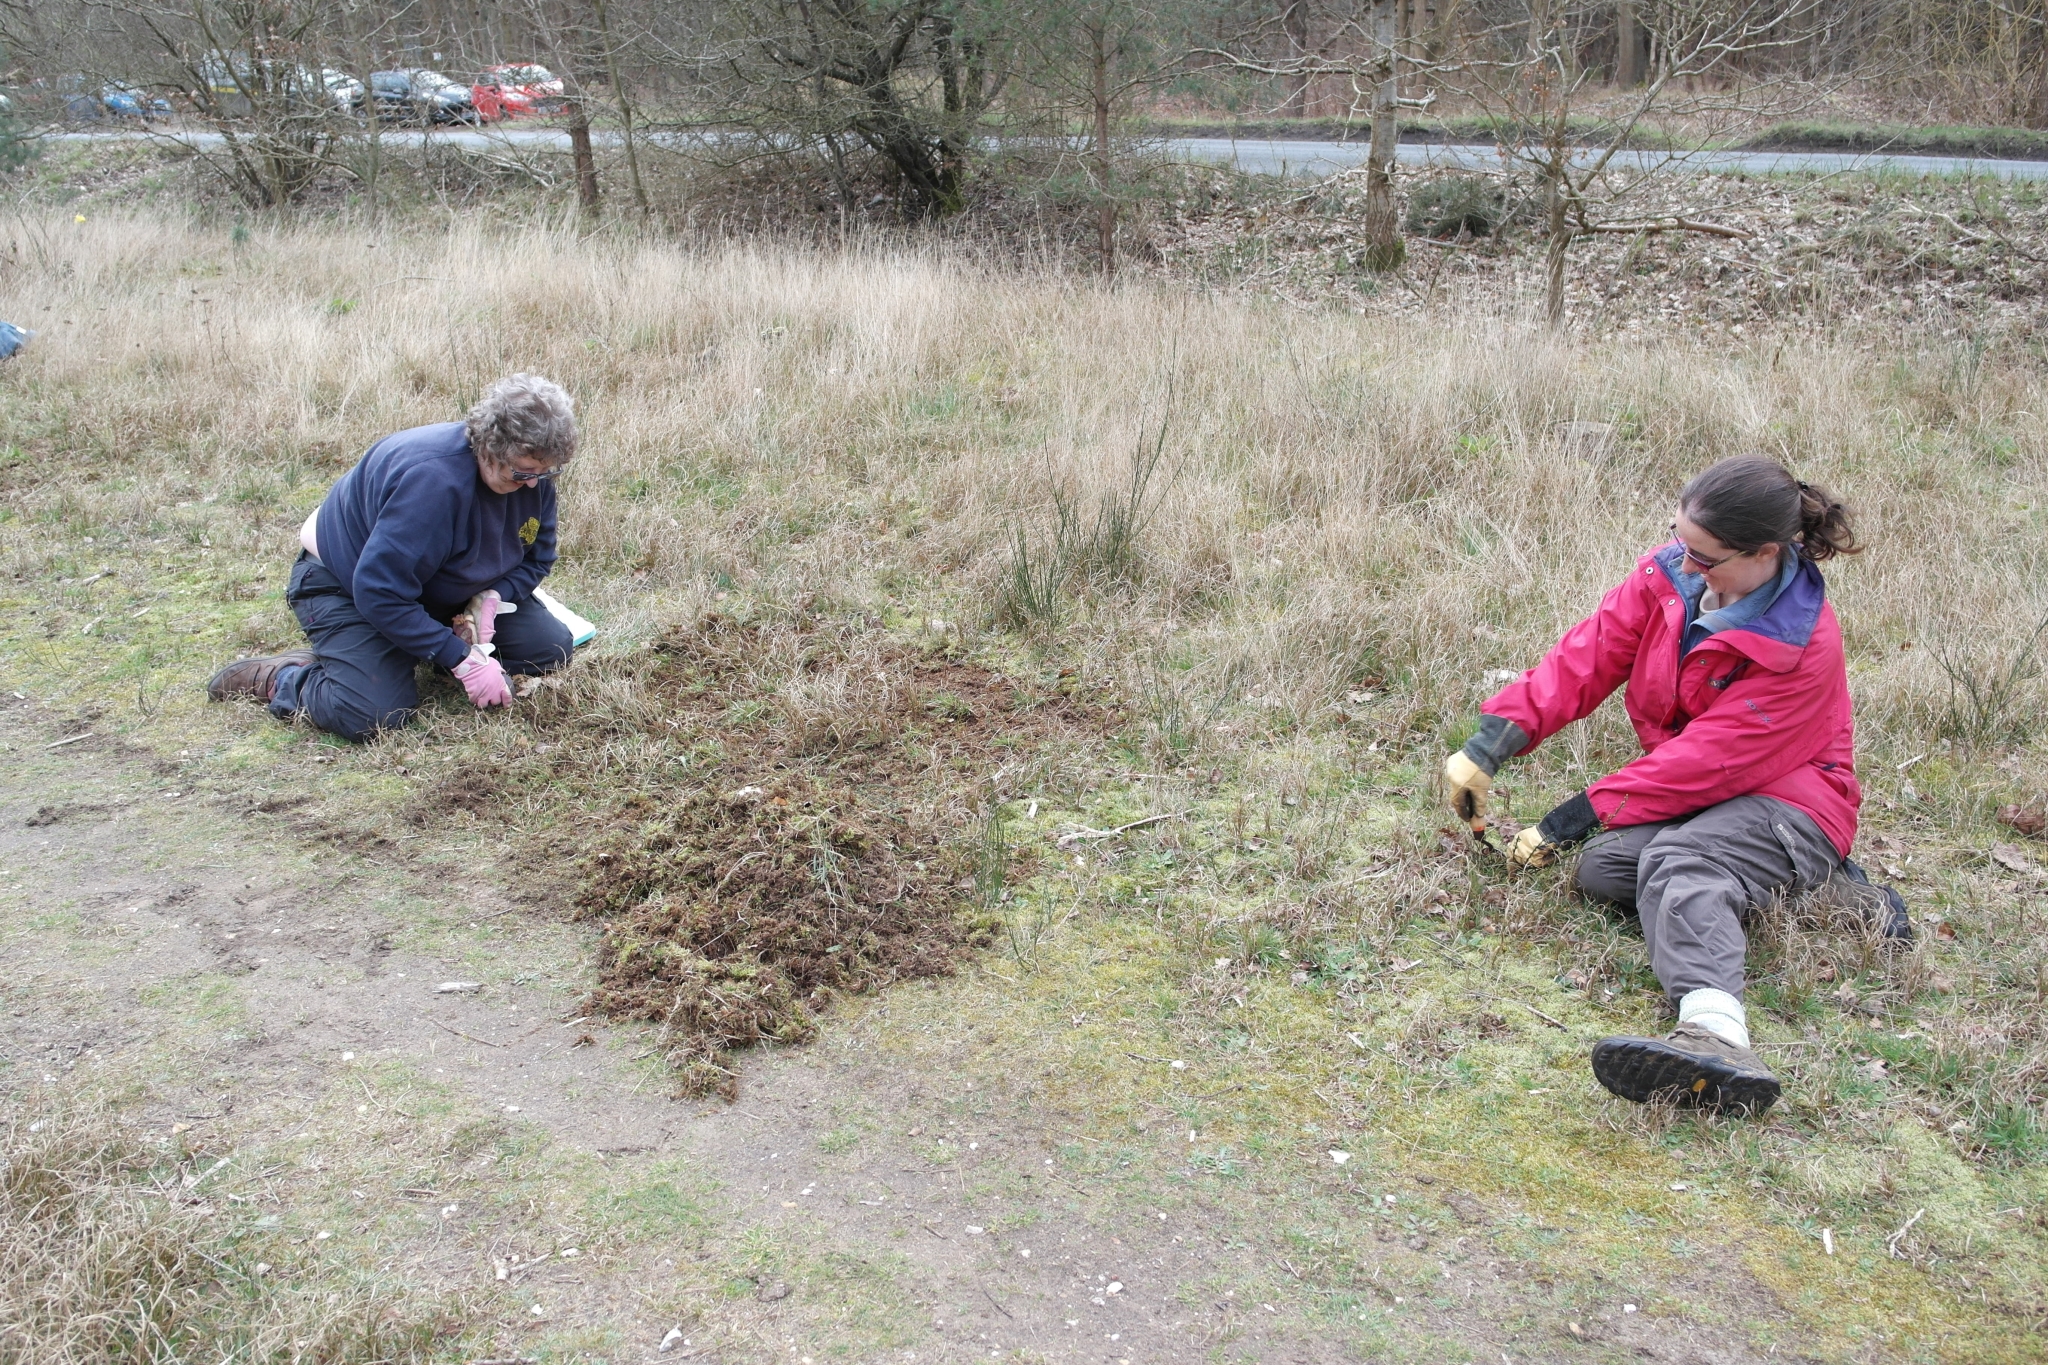 A photo from the FoTF Conservation Event - March 2020 - Habitat Improvement at Quakers Walk, Mildenhall Woods : A volunteer rakes the moss, while the in the background more volunteers are at work improving the habitat